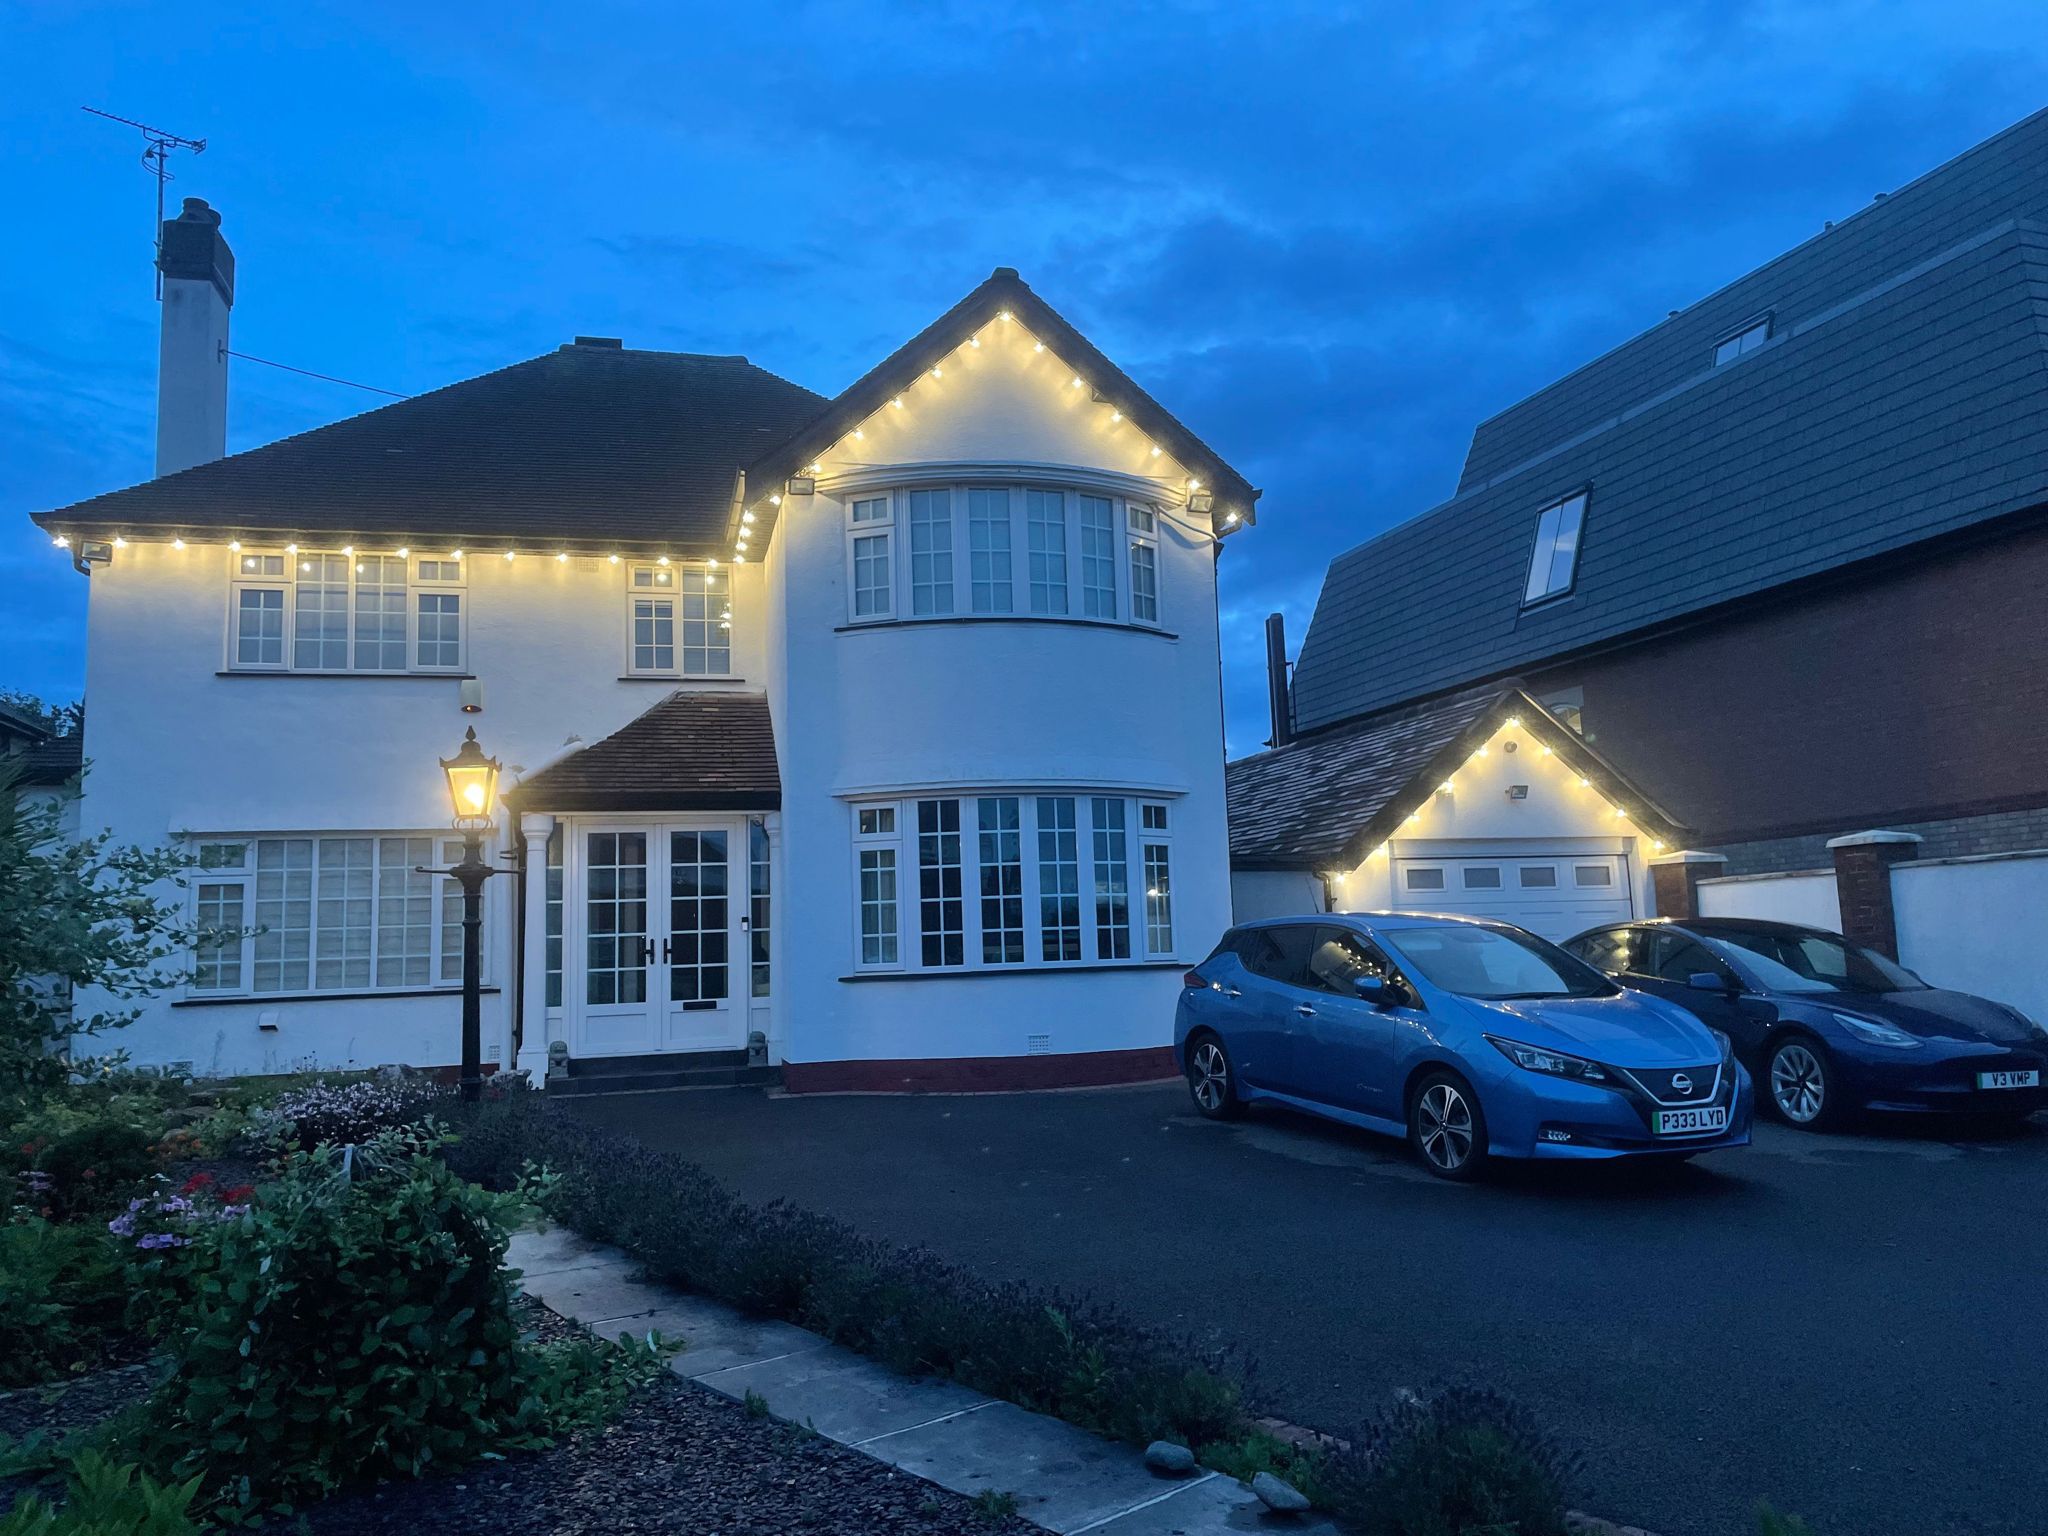 A home and garden in Birkdale Southport has been transformed with 100 metres of decorative lighting by local firm IllumiDex UK Ltd